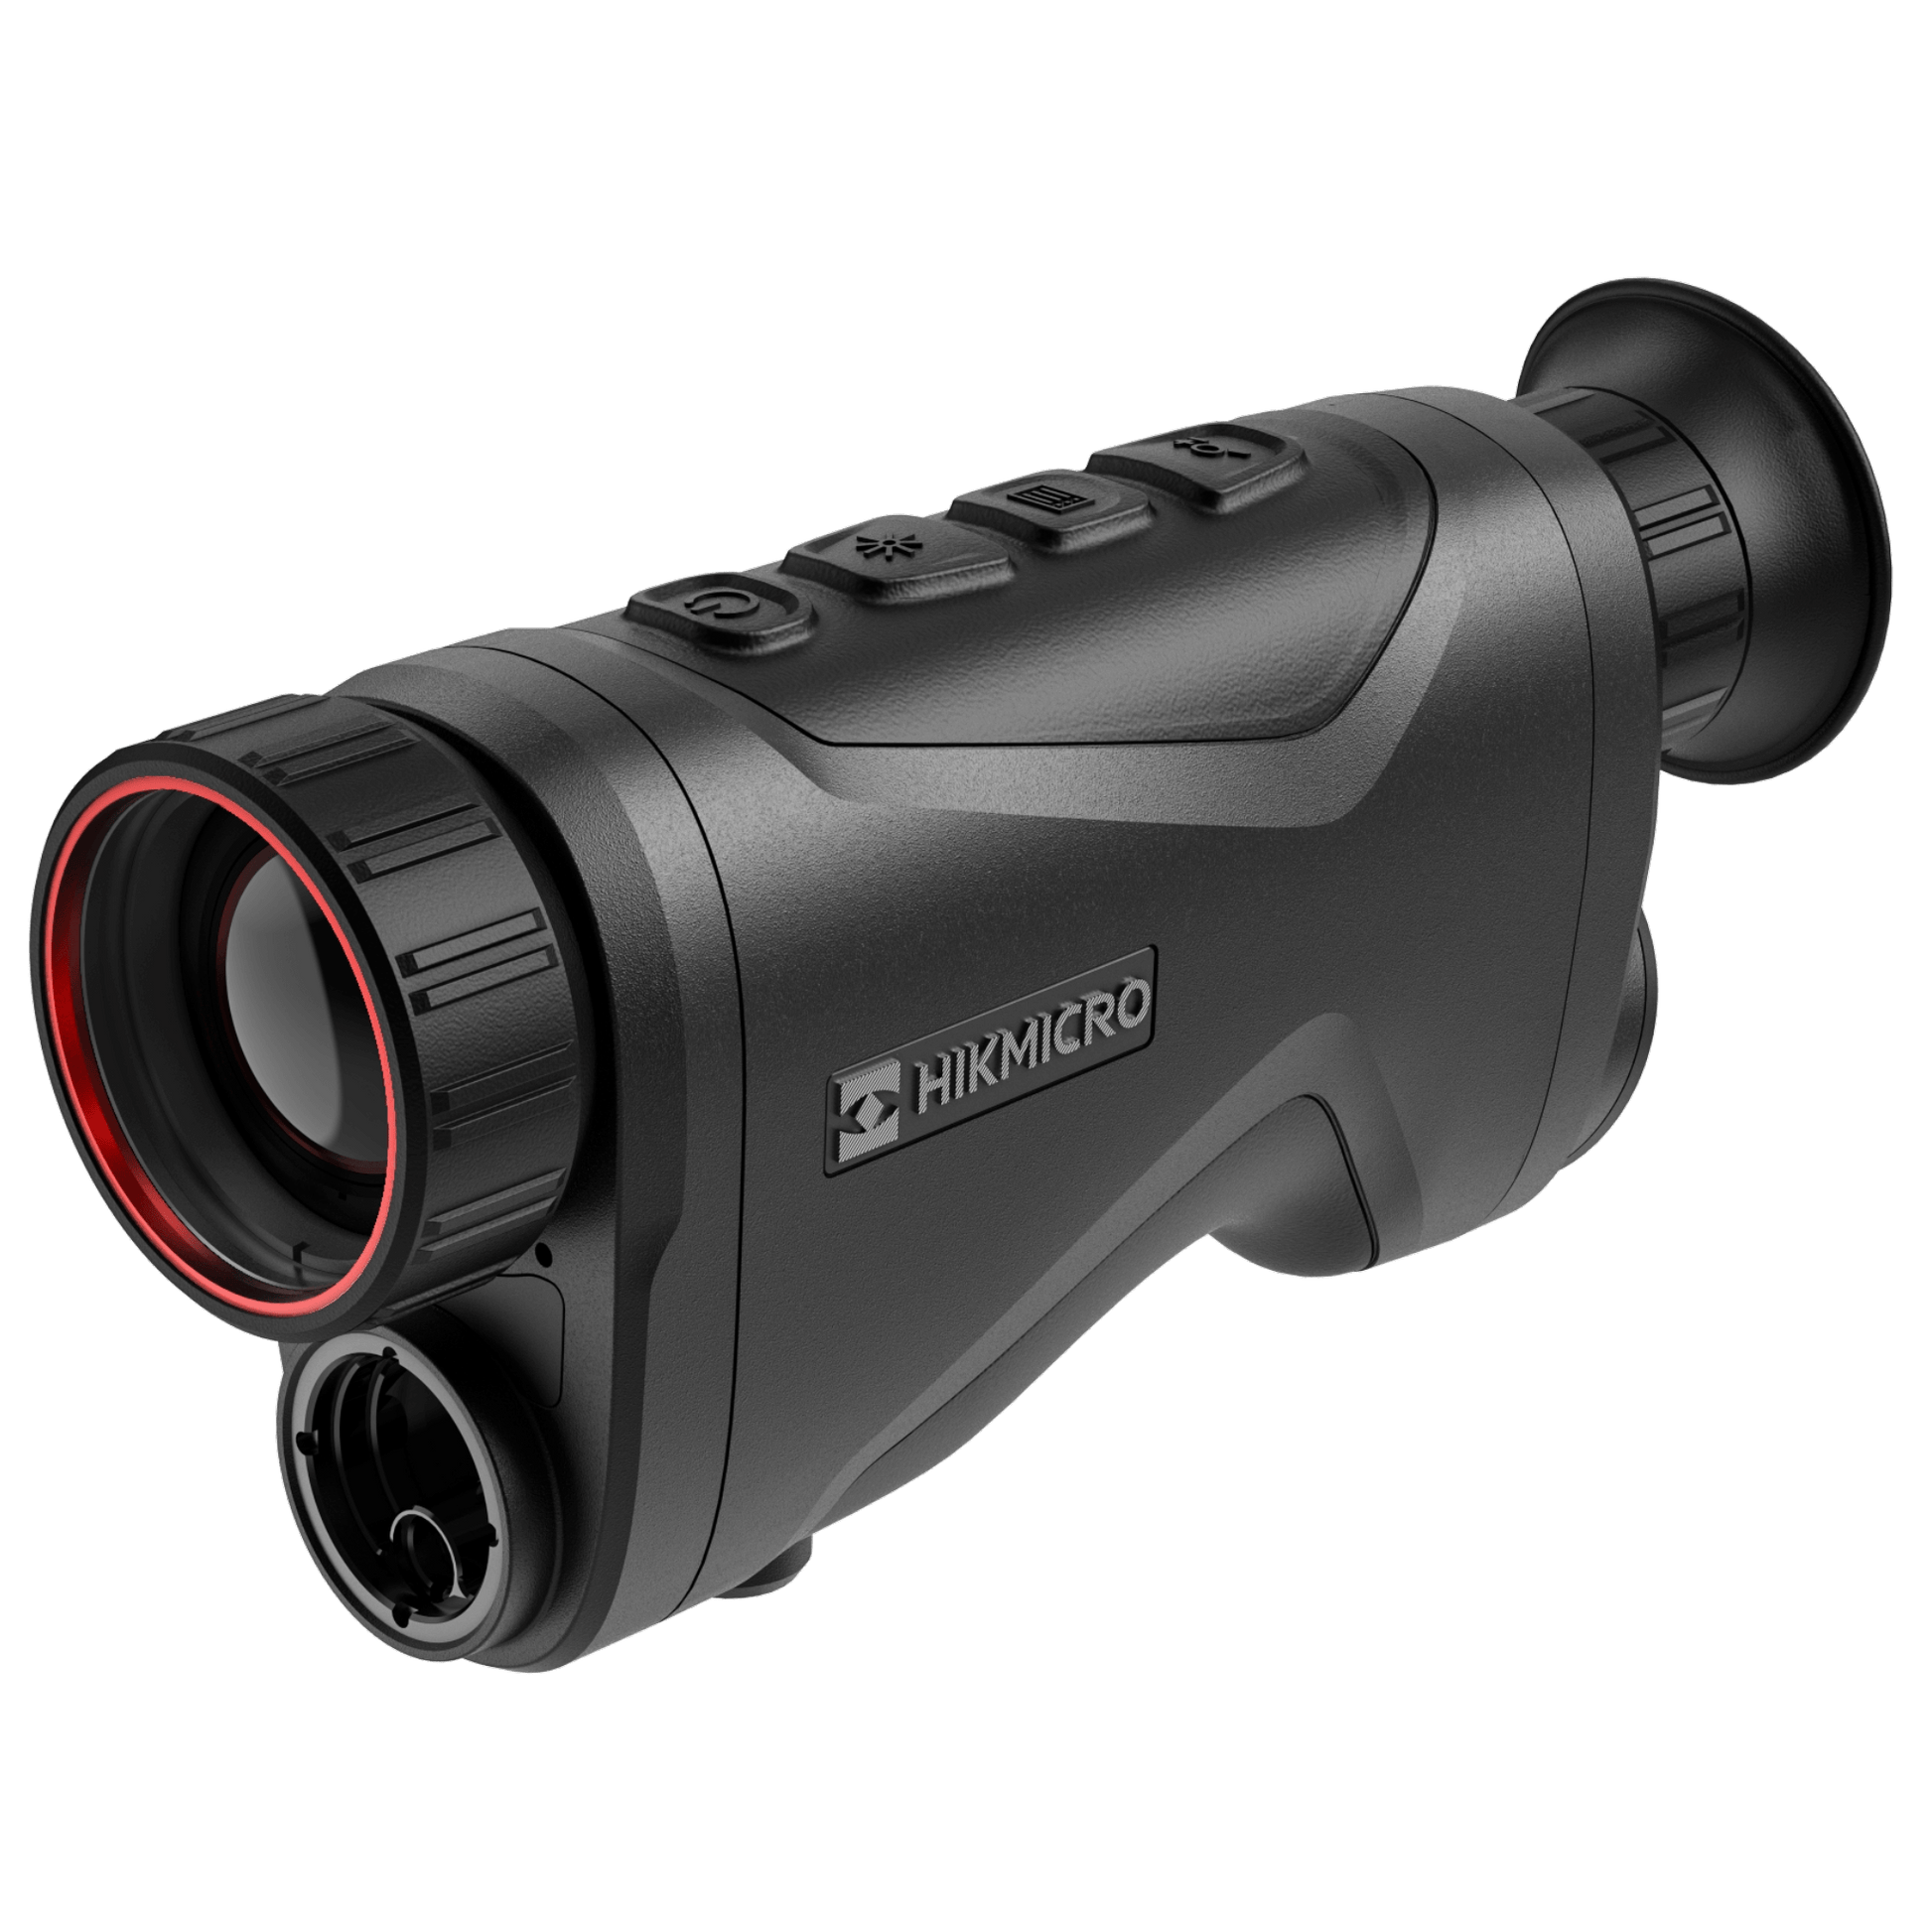 Front view of HikMicro Condor CH35L Thermal Monocular with Rangefinder, showcasing lens and ergonomic design. Best thermal imaging device for hunting and security.